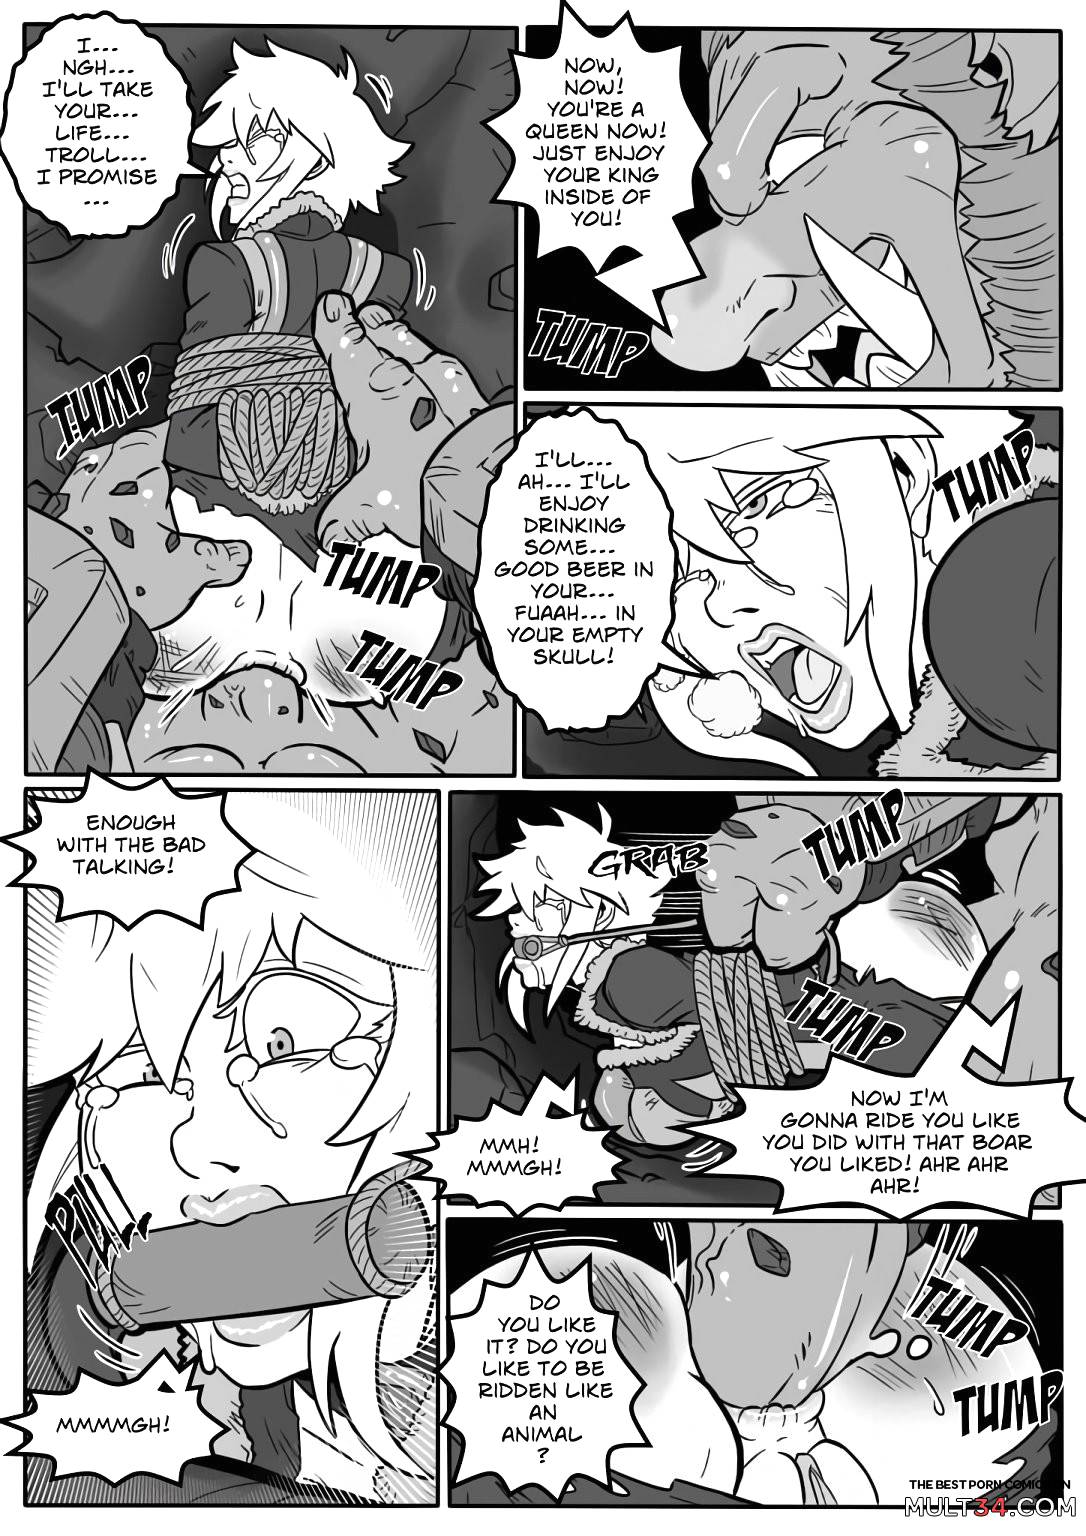 Tales of the Troll King 2 page 11